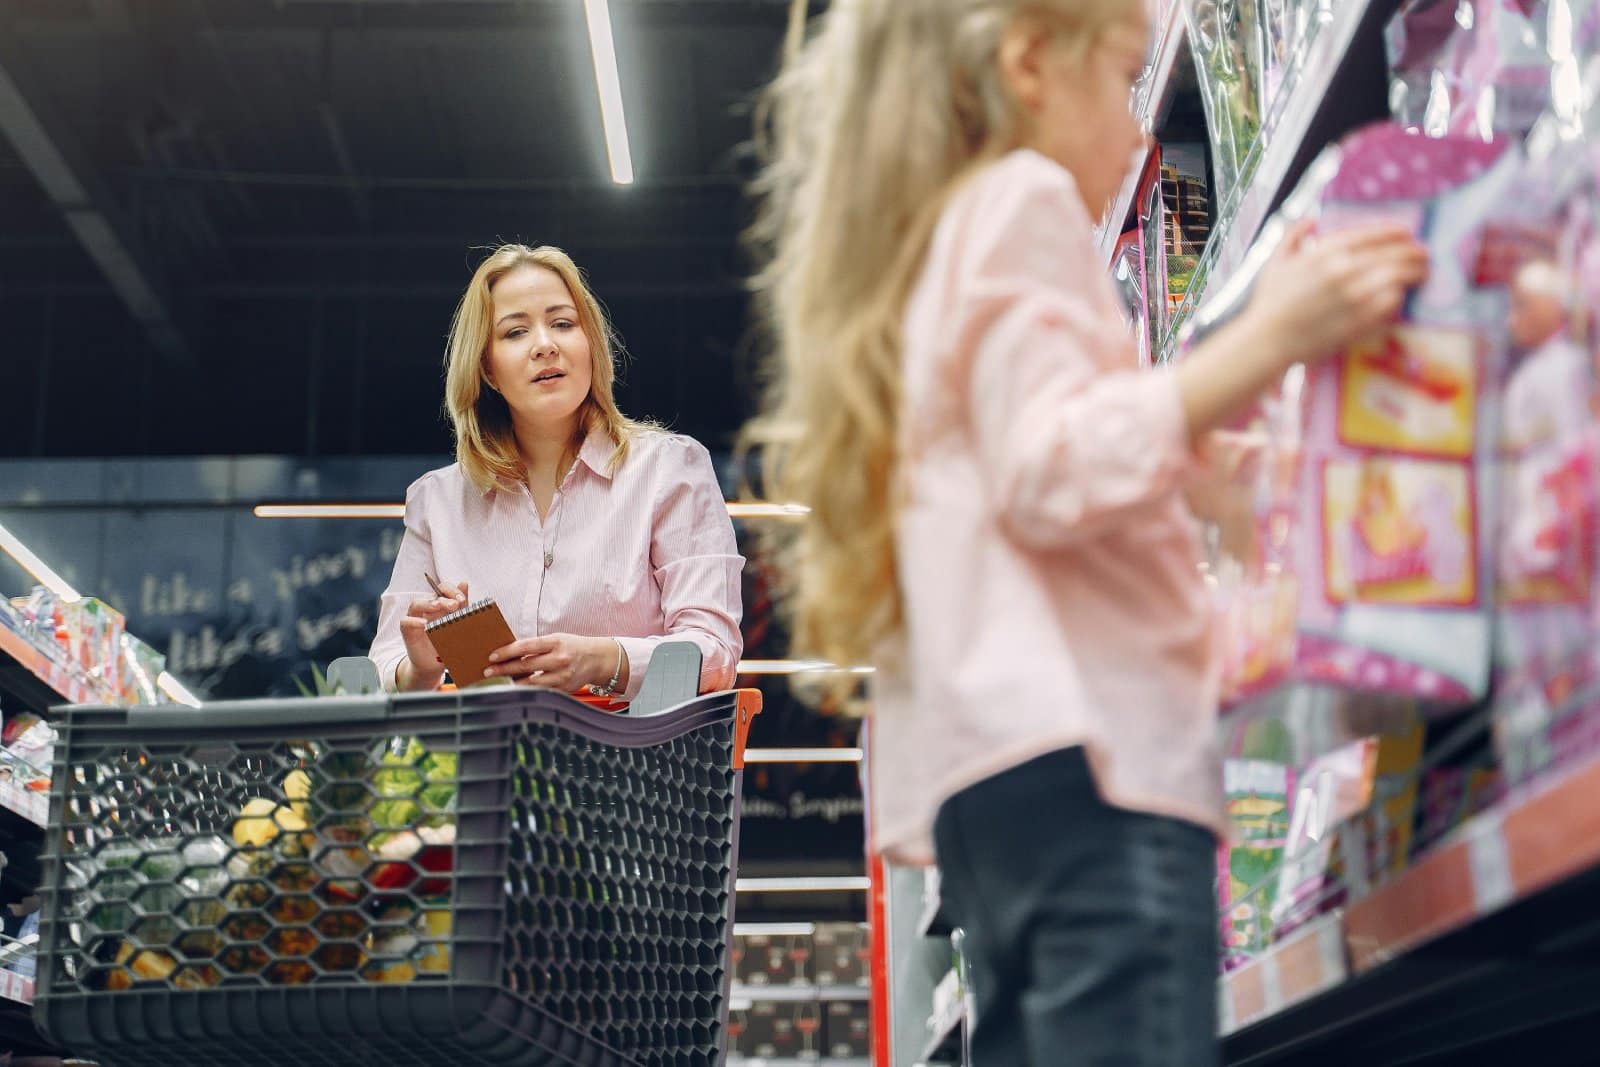 Image Credit: Pexels / Gustavo Fring <p>Ever wandered Costco’s aisles, questioning if that giant jar of pickles is a real bargain? Or debated buying tires where you get your rotisserie chicken? Welcome to the definitive guide to Costco shopping—a journey to save money, prevent regrets, and offer quirky insights into bulk buying. <strong><a href="https://www.msn.com/en-us/money/other/8-costco-must-buys-and-8-to-leave-behind/ss-AA1neMG5" rel="noopener">8 Costco Must Buys and 8 to Leave Behind</a></strong></p>